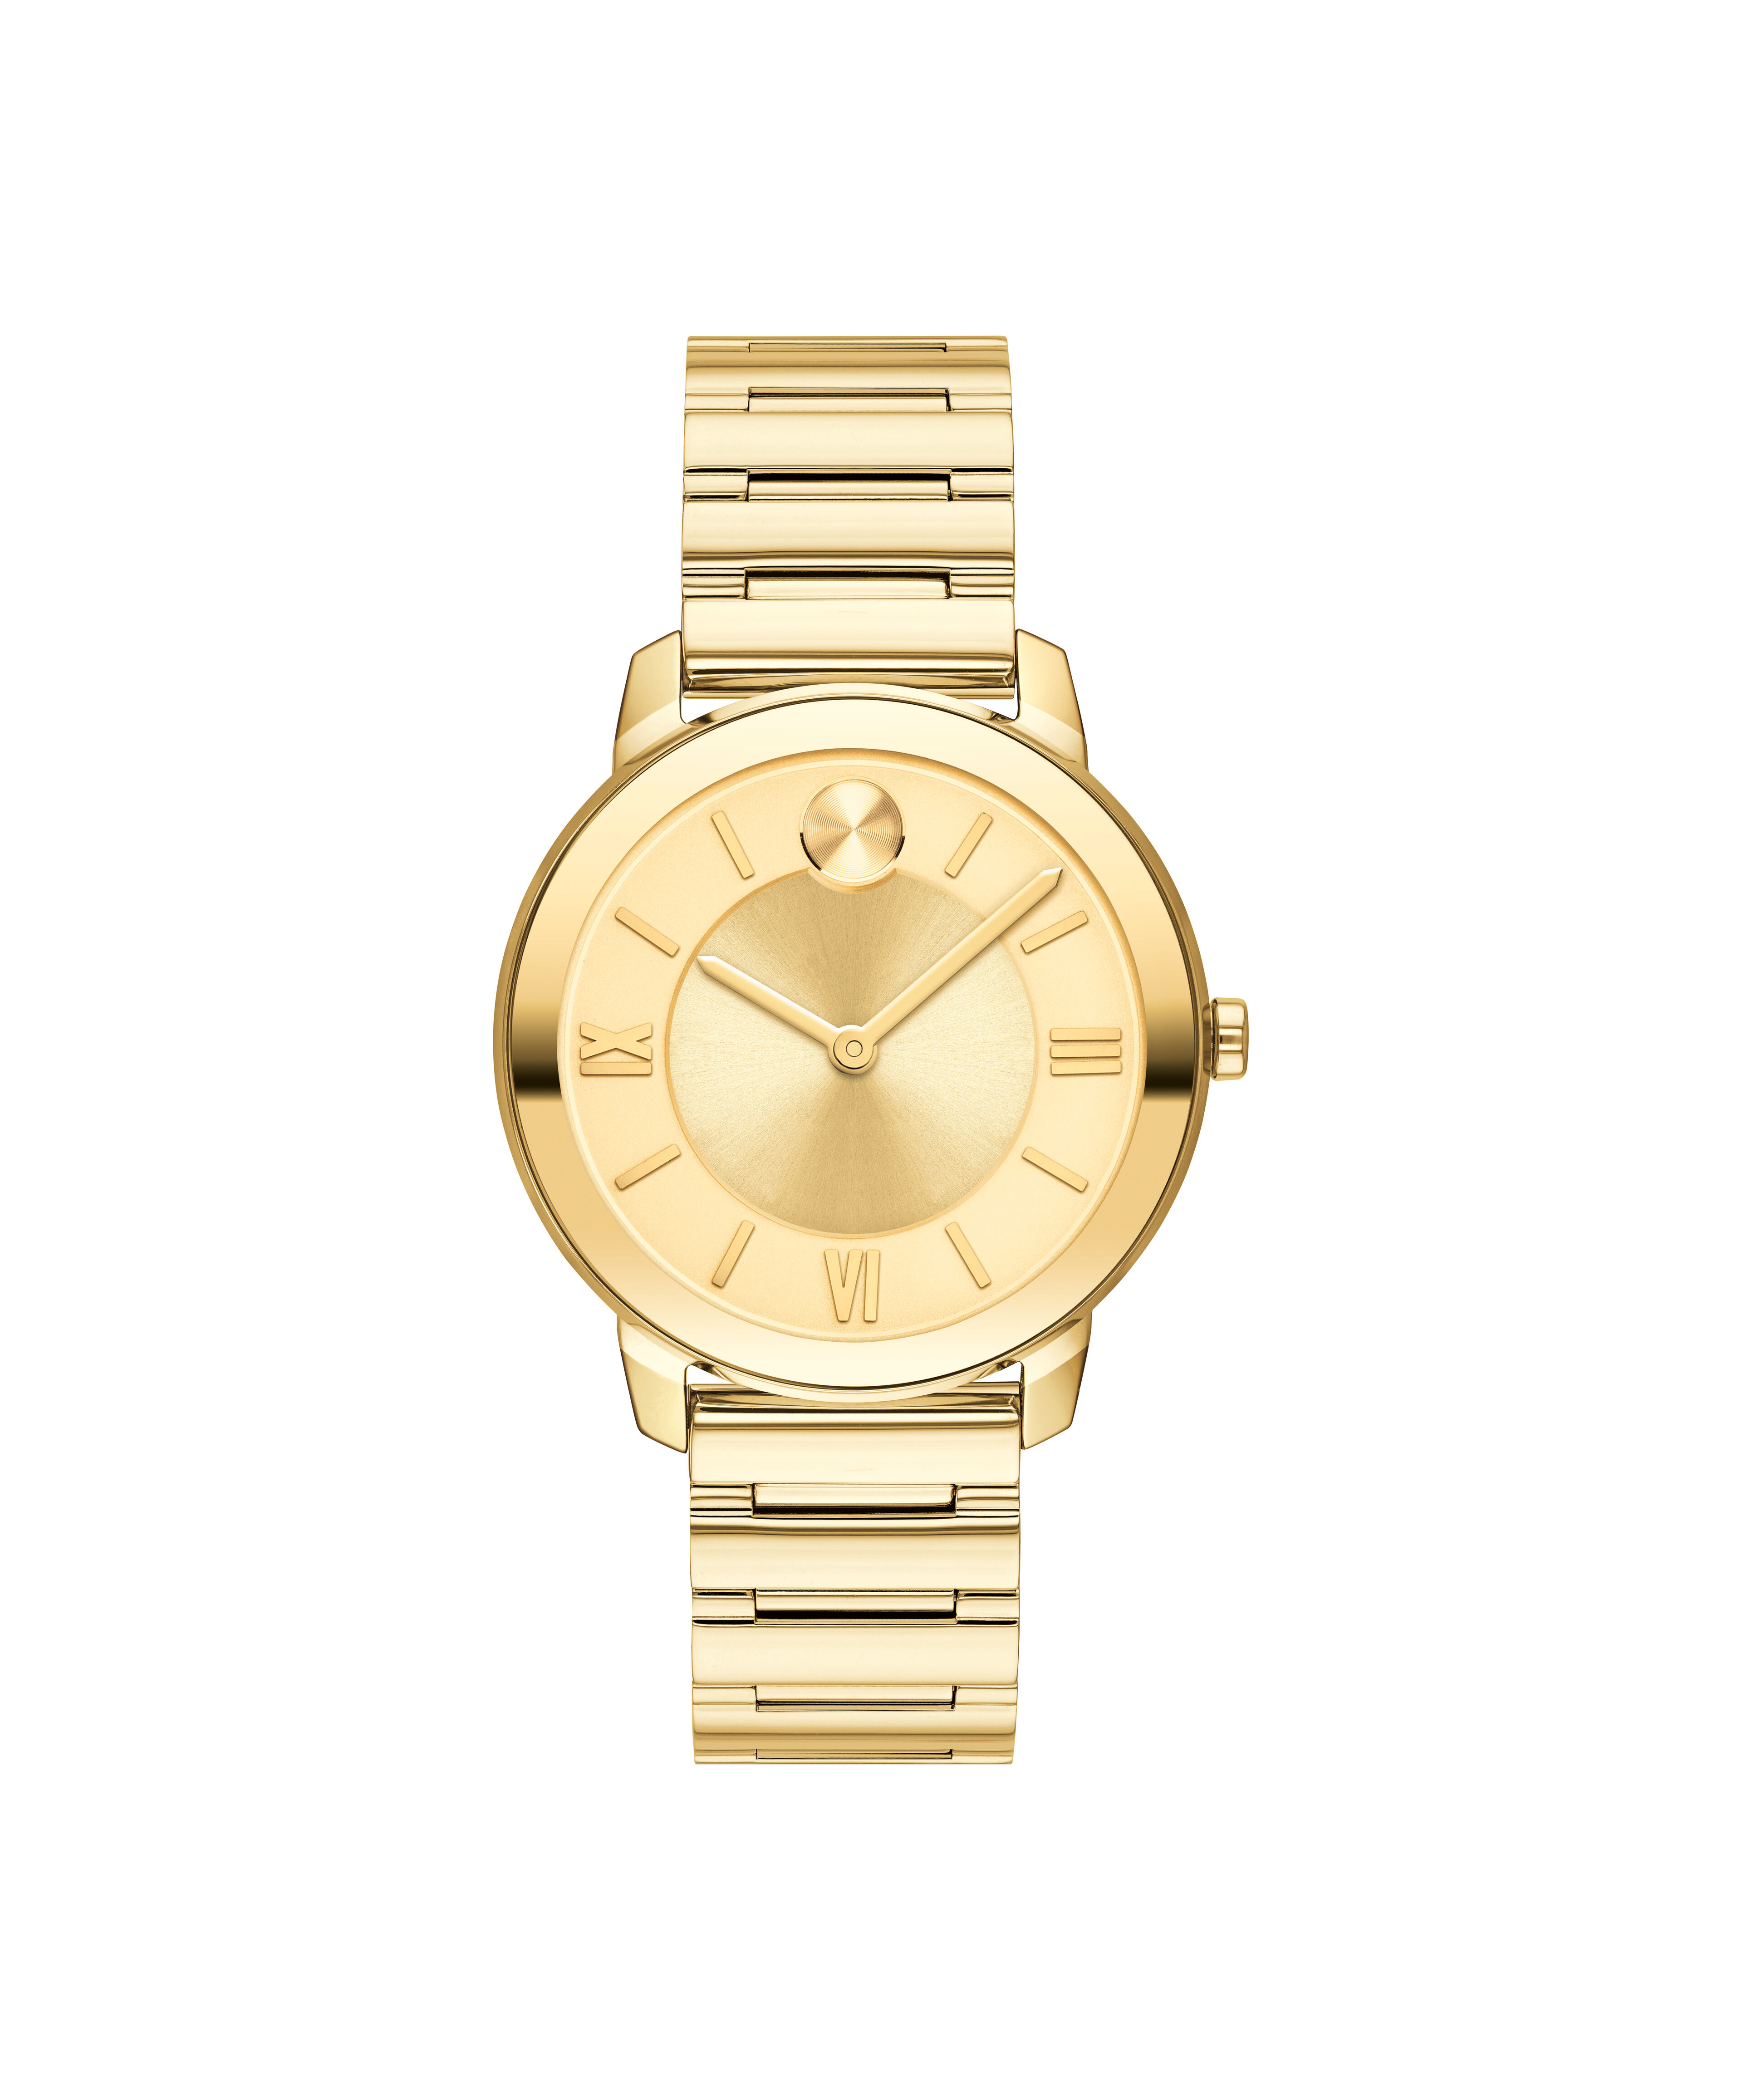 Cheap Fake Gold Watches